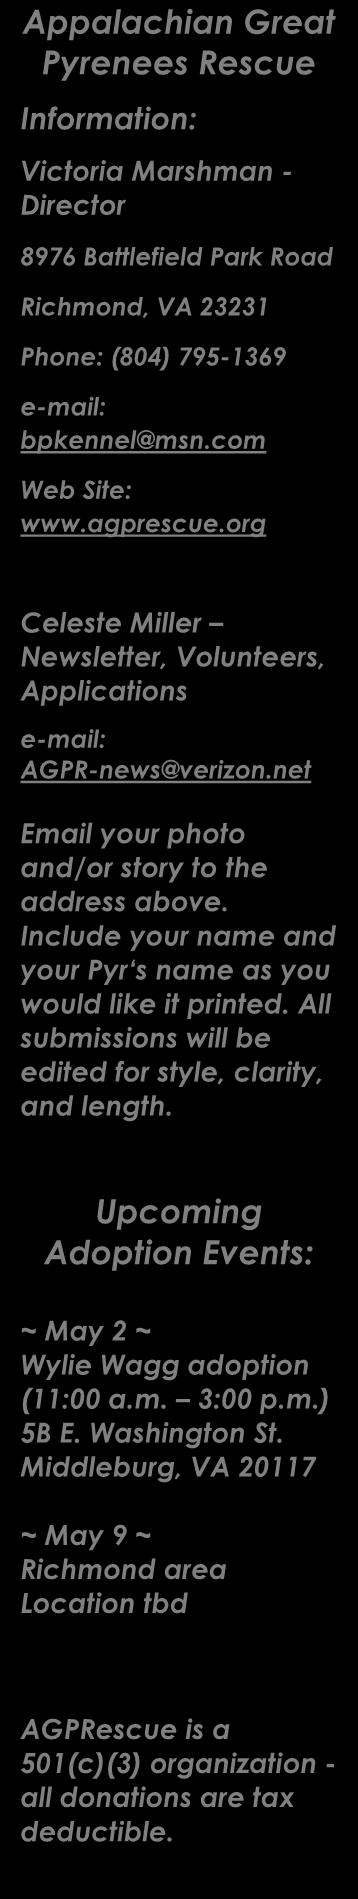 net Email your photo and/or story to the address above. Include your name and your Pyr s name as you would like it printed. All submissions will be edited for style, clarity, and length.